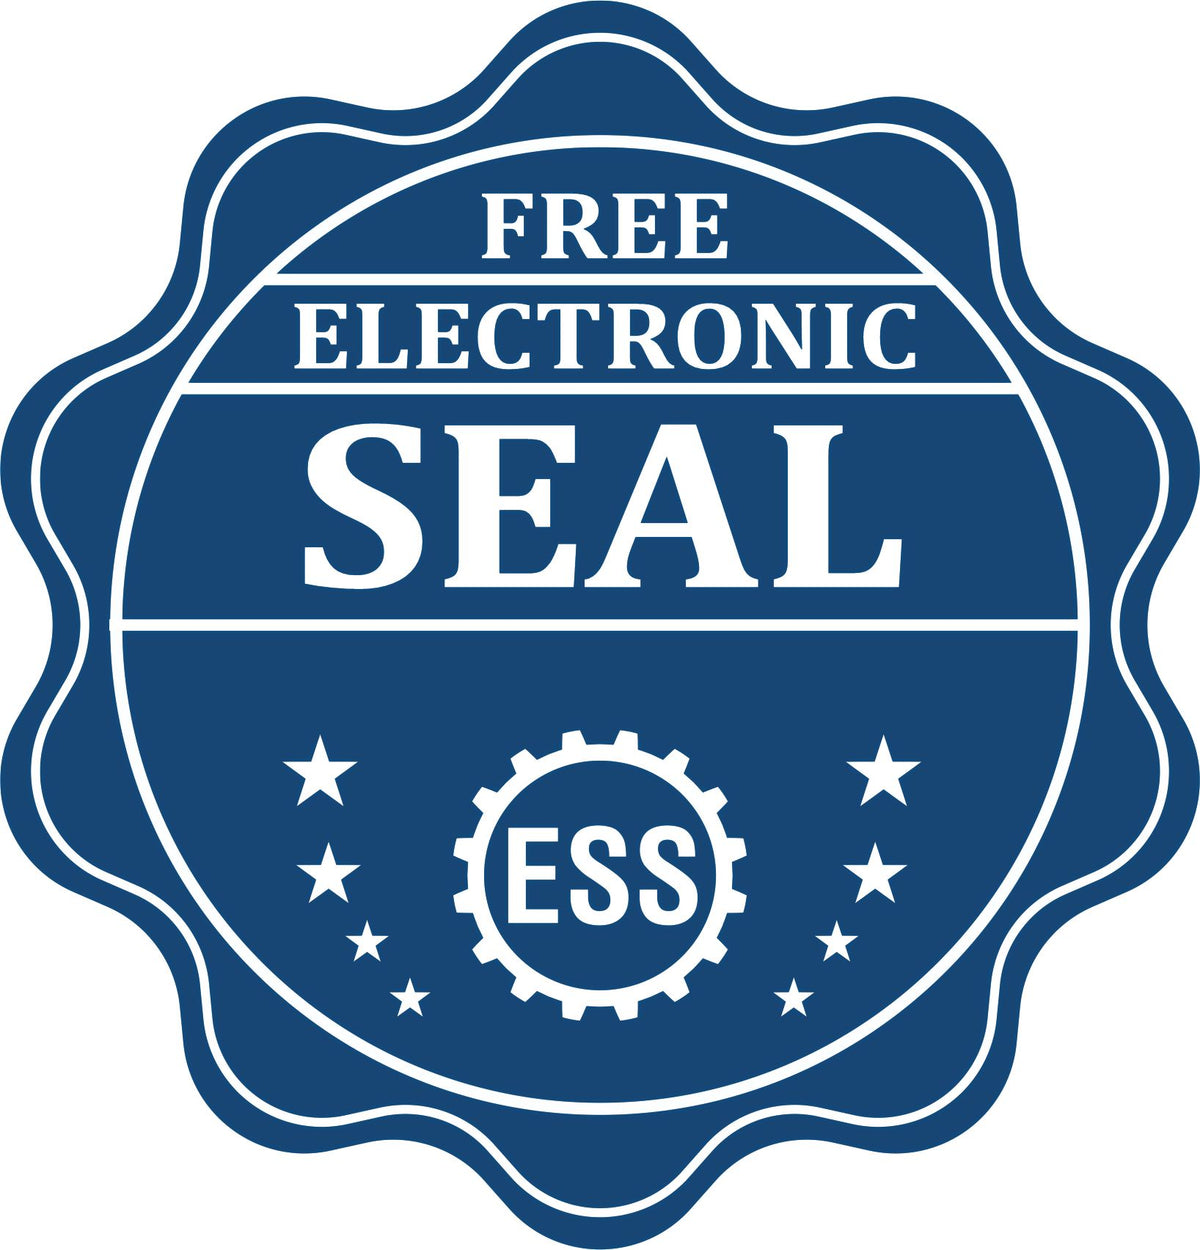 A badge showing a free electronic seal for the Hybrid District of Columbia Landscape Architect Seal with stars and the ESS gear on the emblem.